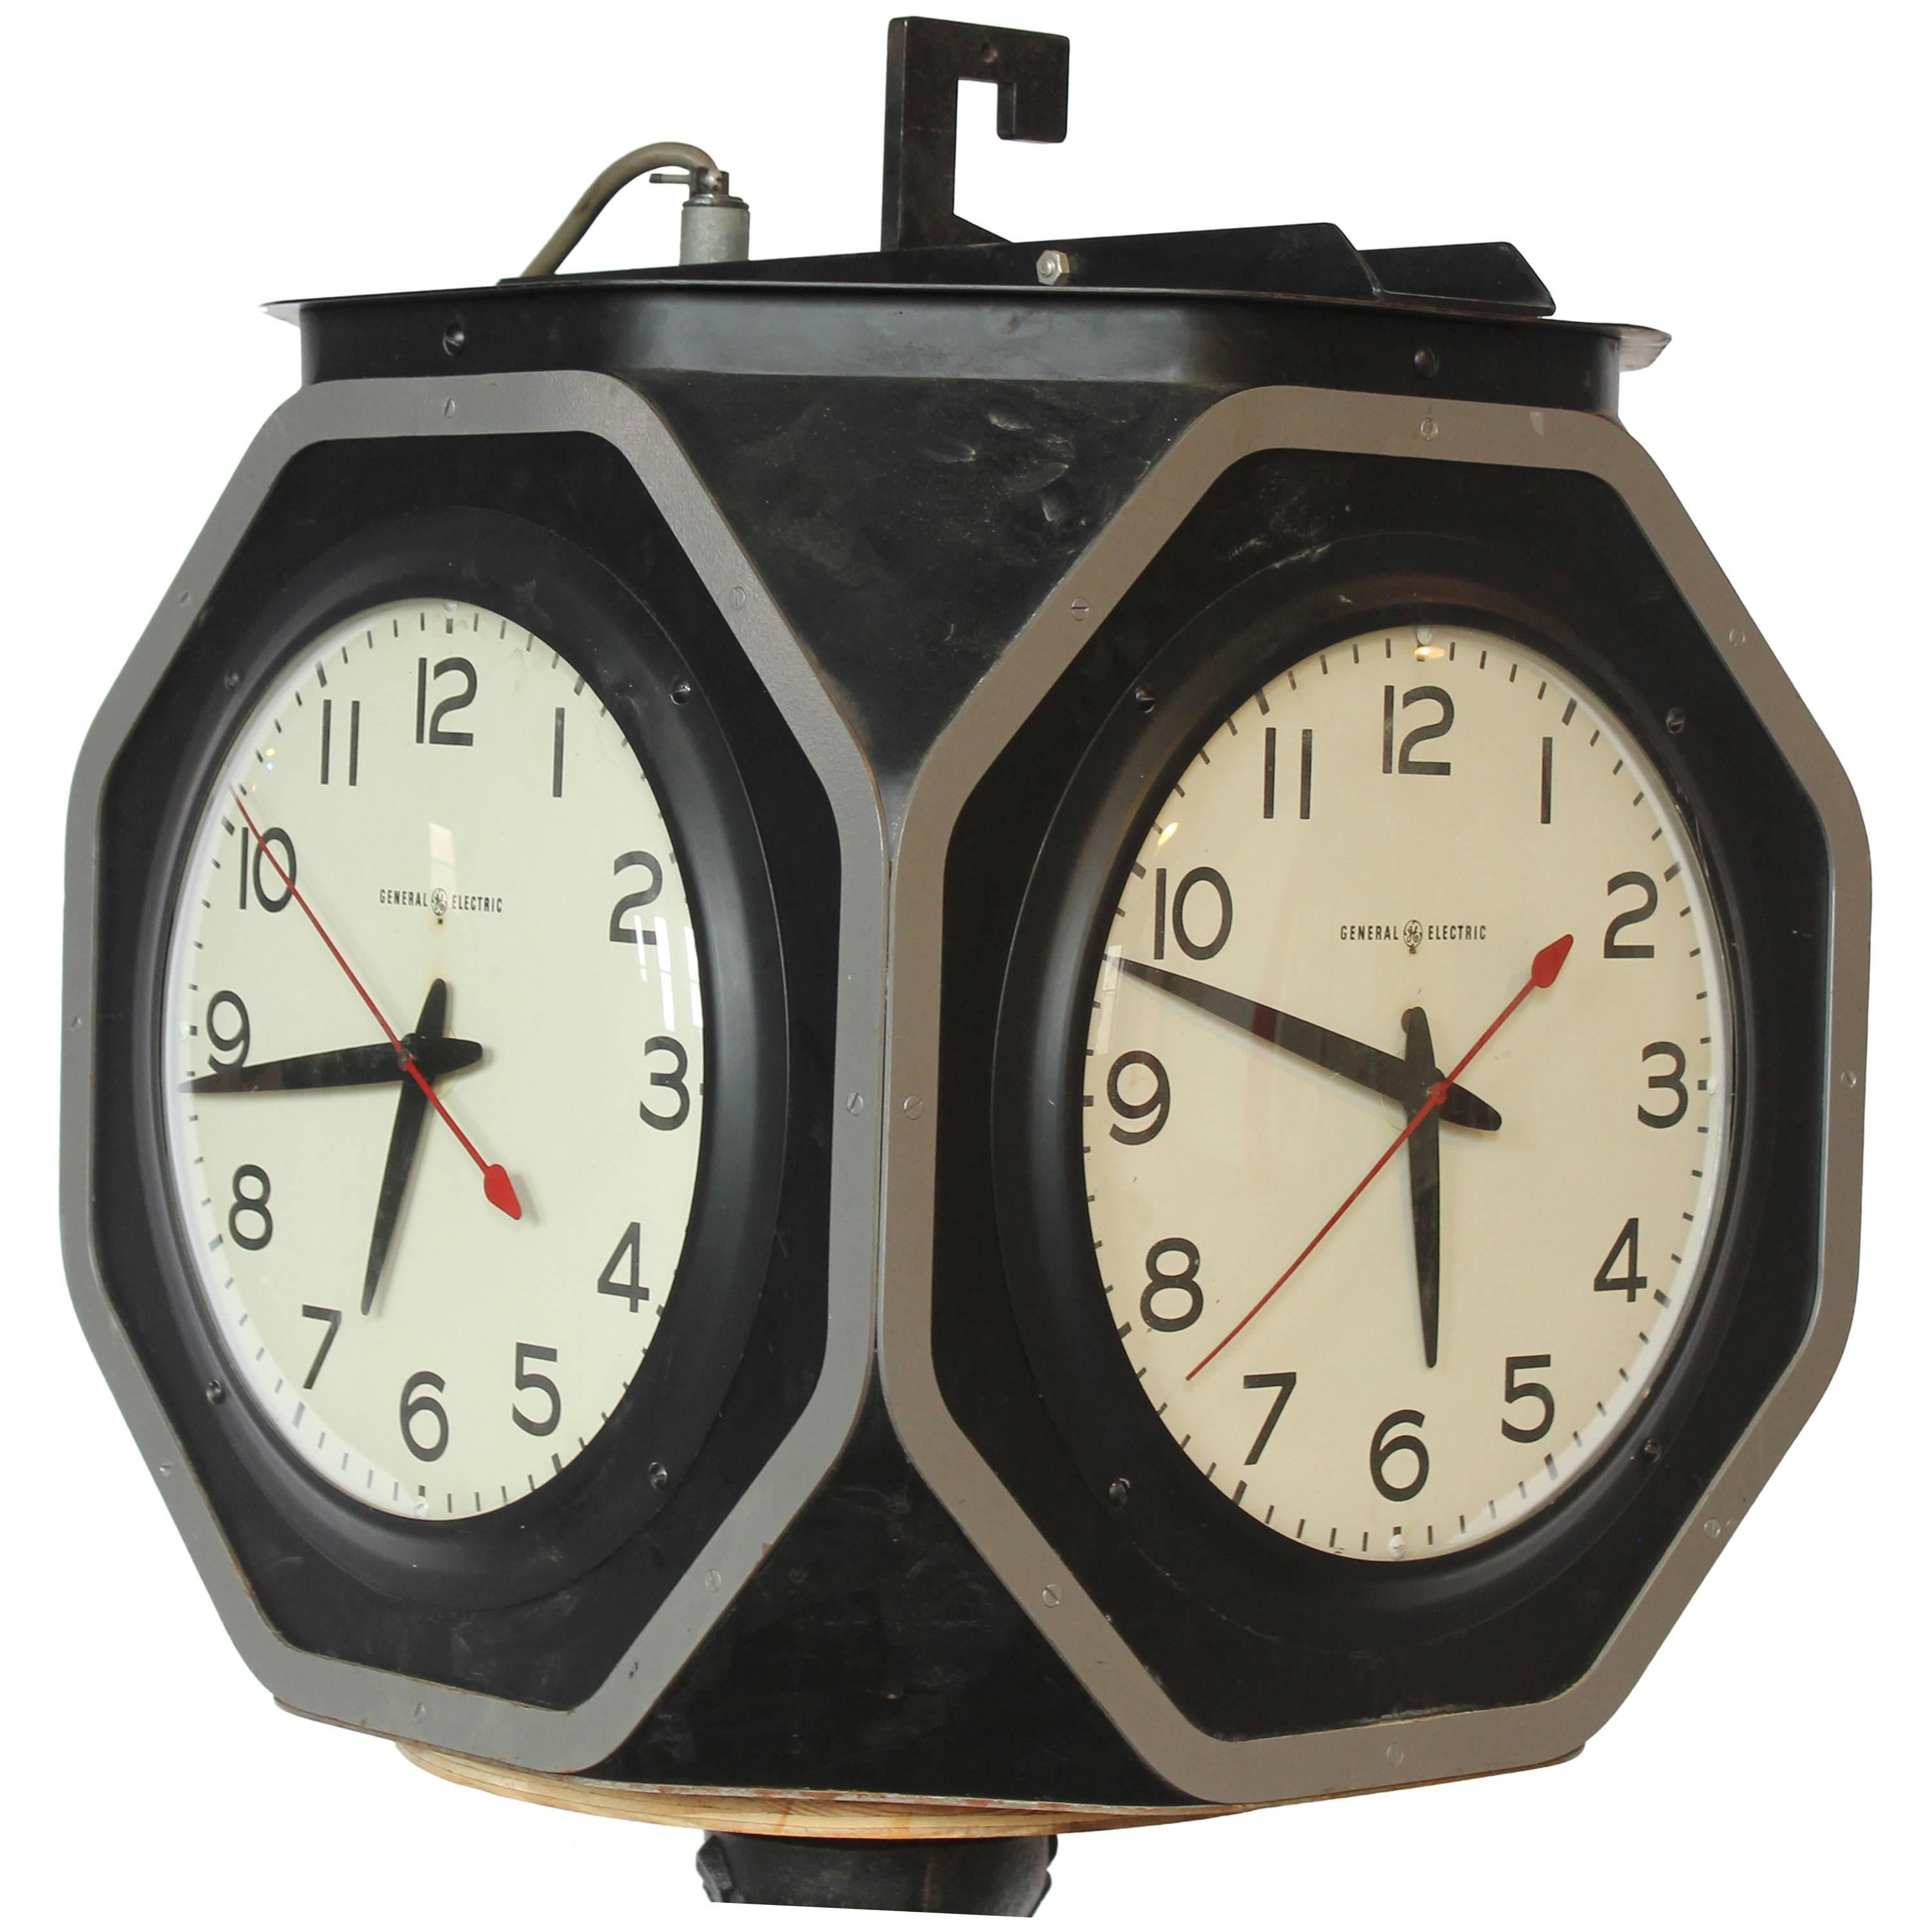 1930s Four-Sided Train Station Clock by General Electric